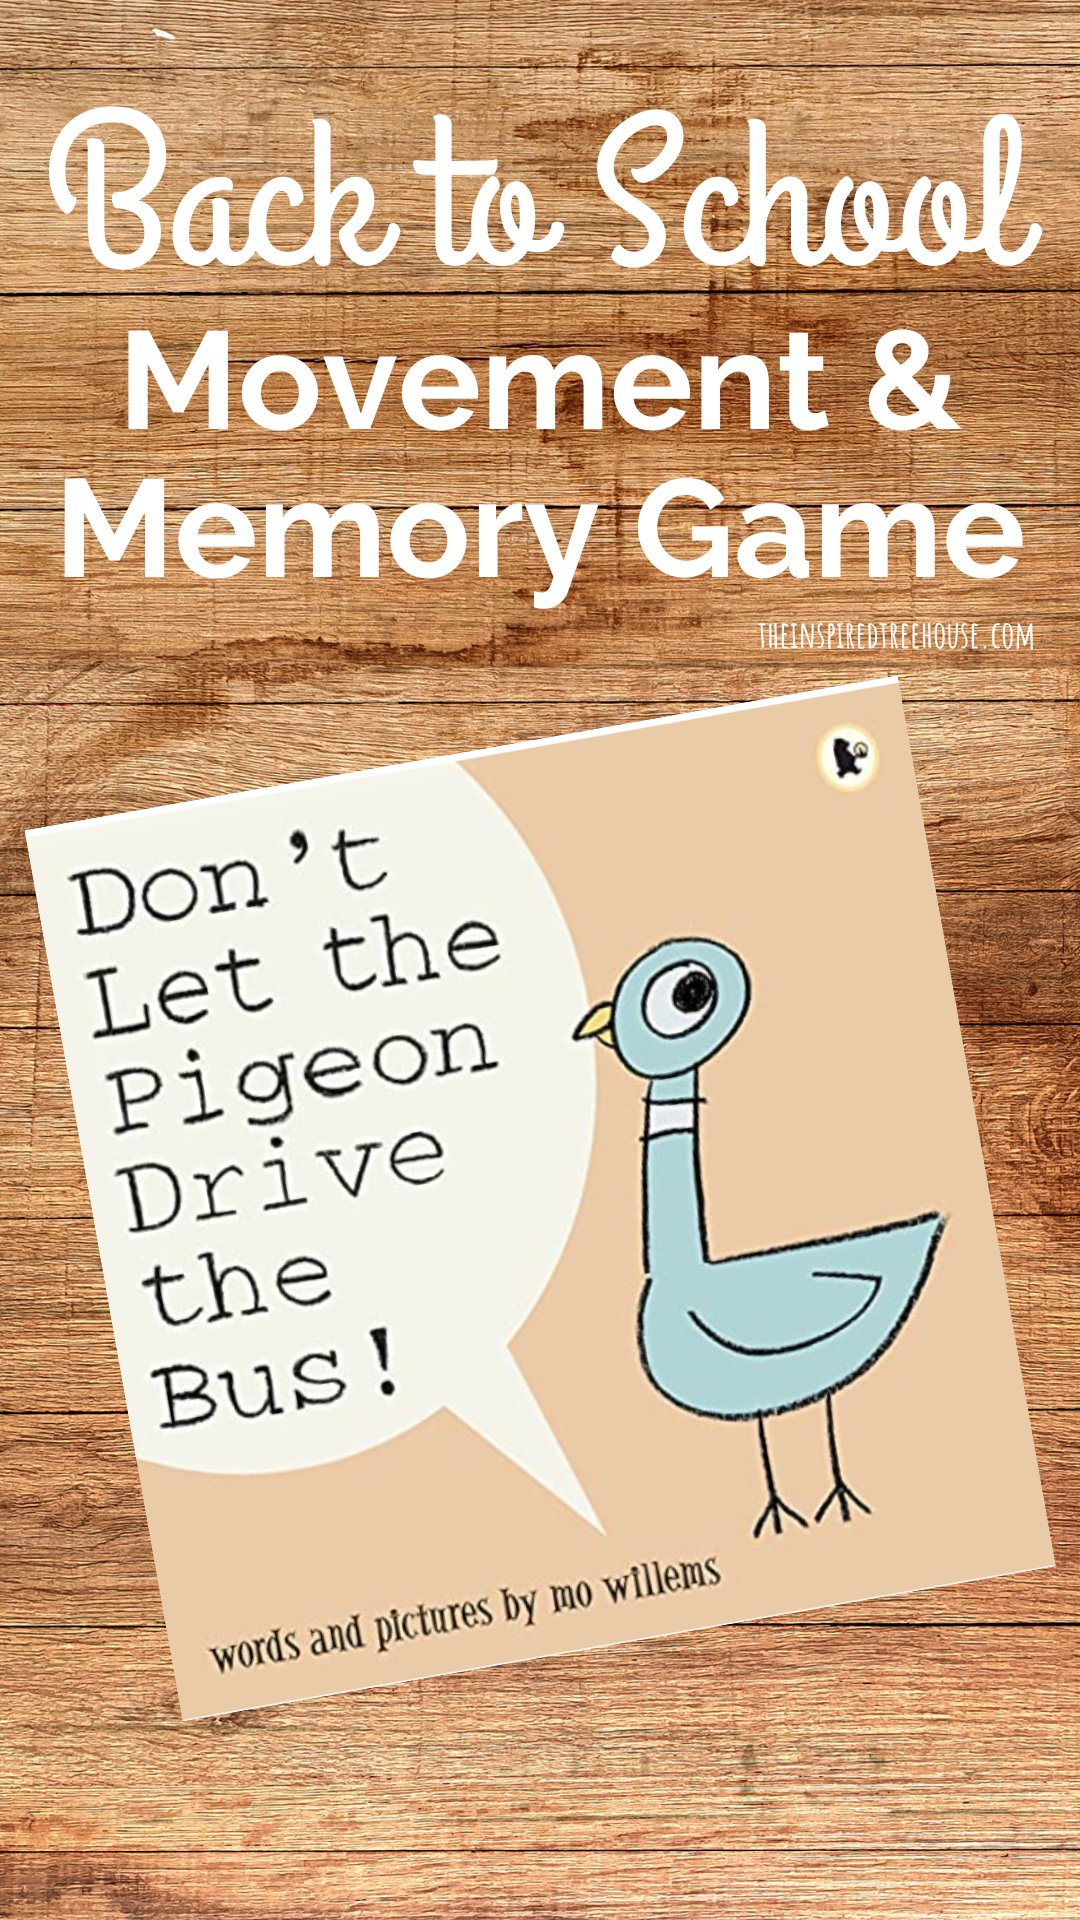 Image showing the book Don't Let the Pigeon Drive the Bus with text about creative movement activities for back to school.